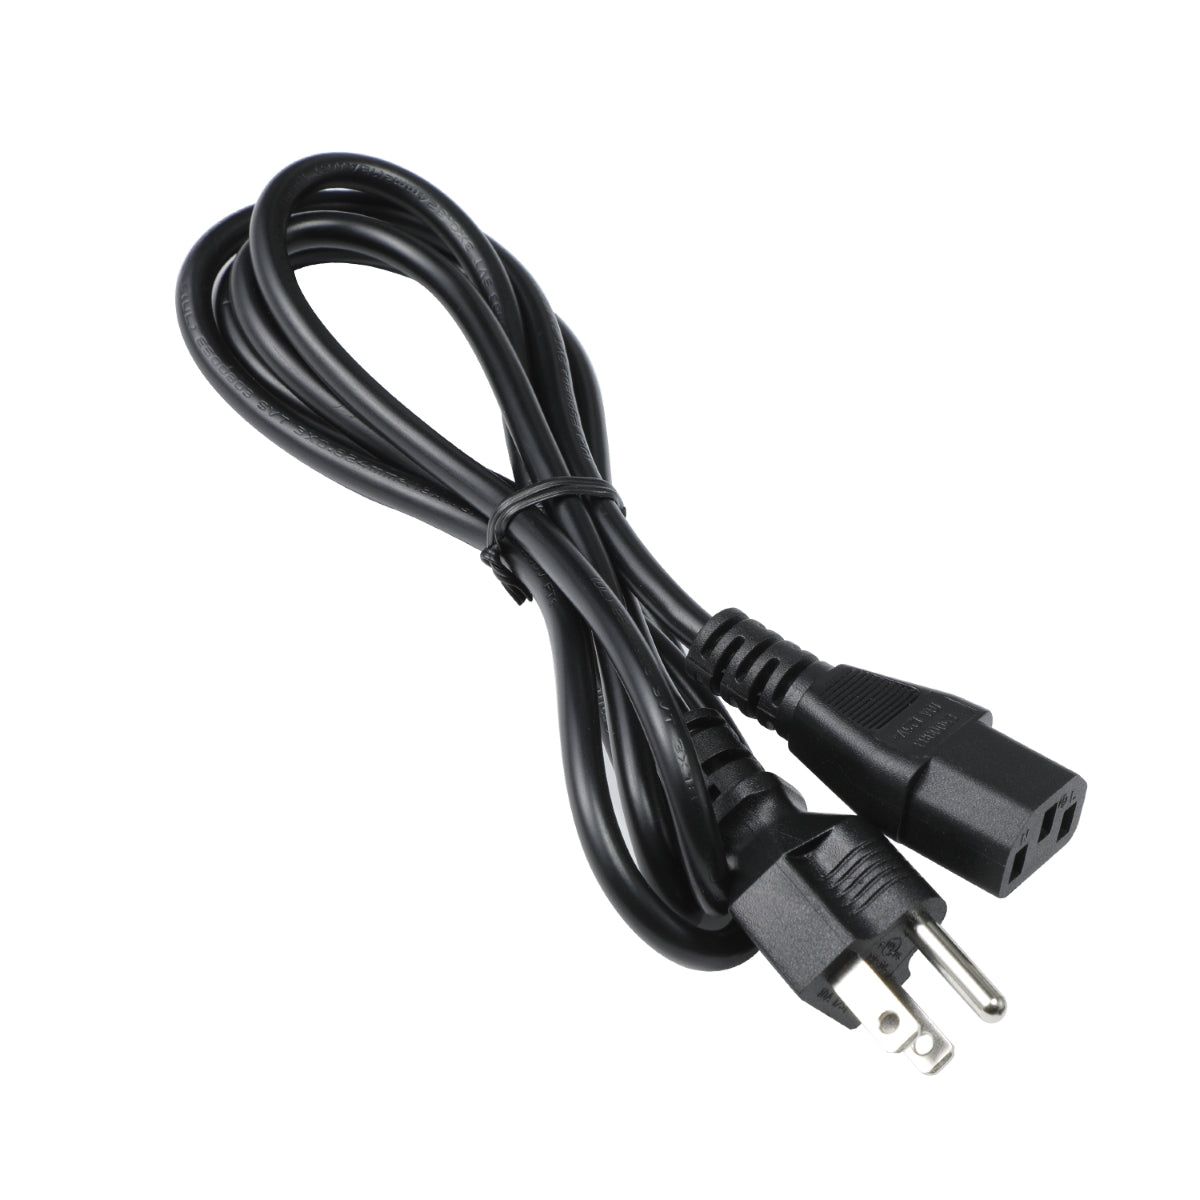 Power Cord for HP ProDesk 400 G5 Microtower SFF Desktop PC.